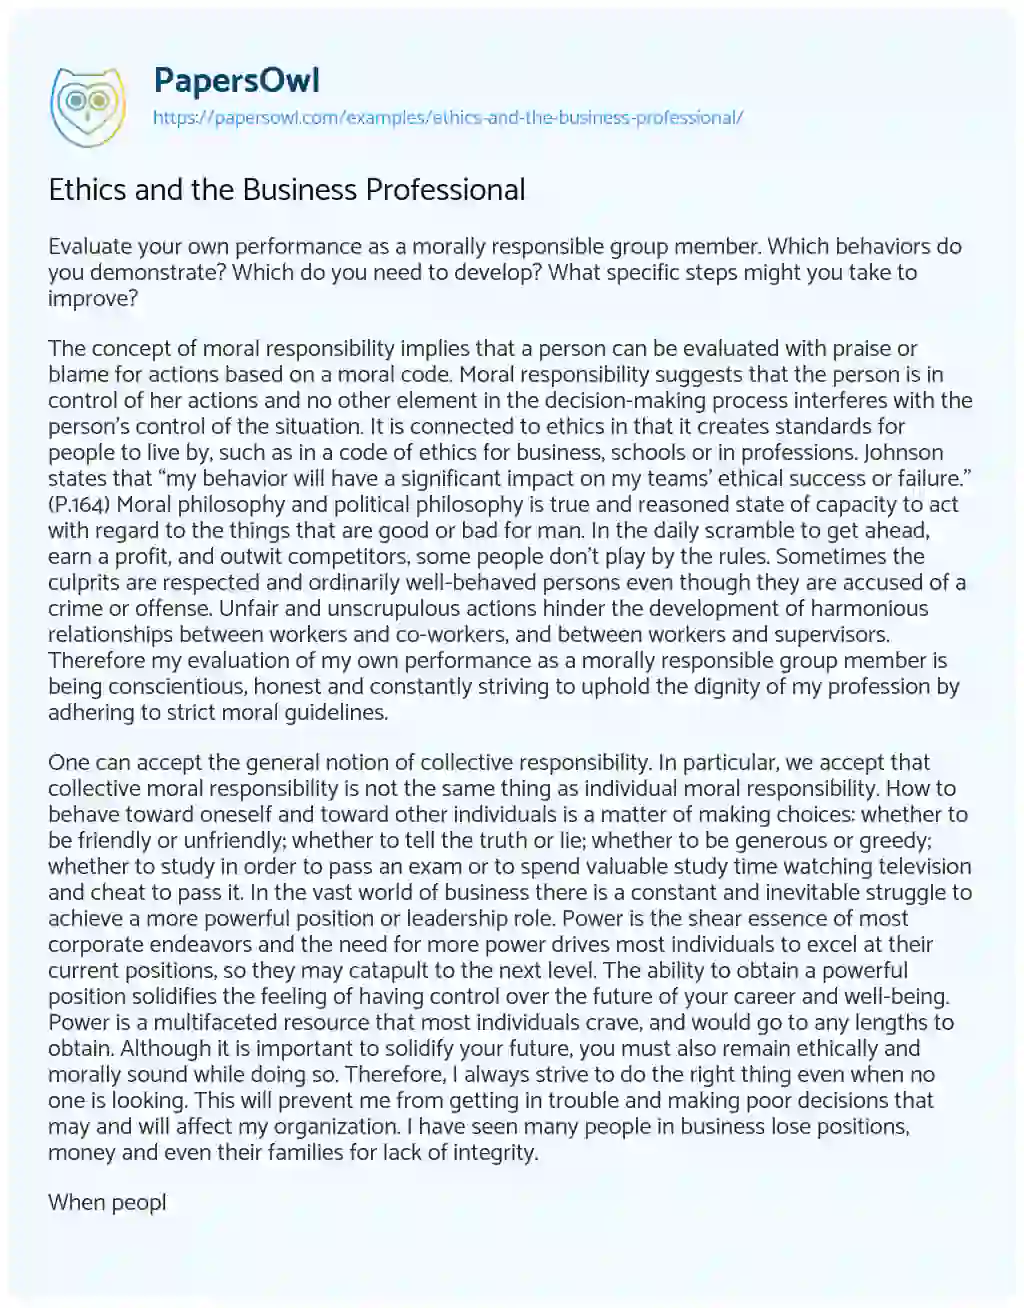 Ethics and the Business Professional essay